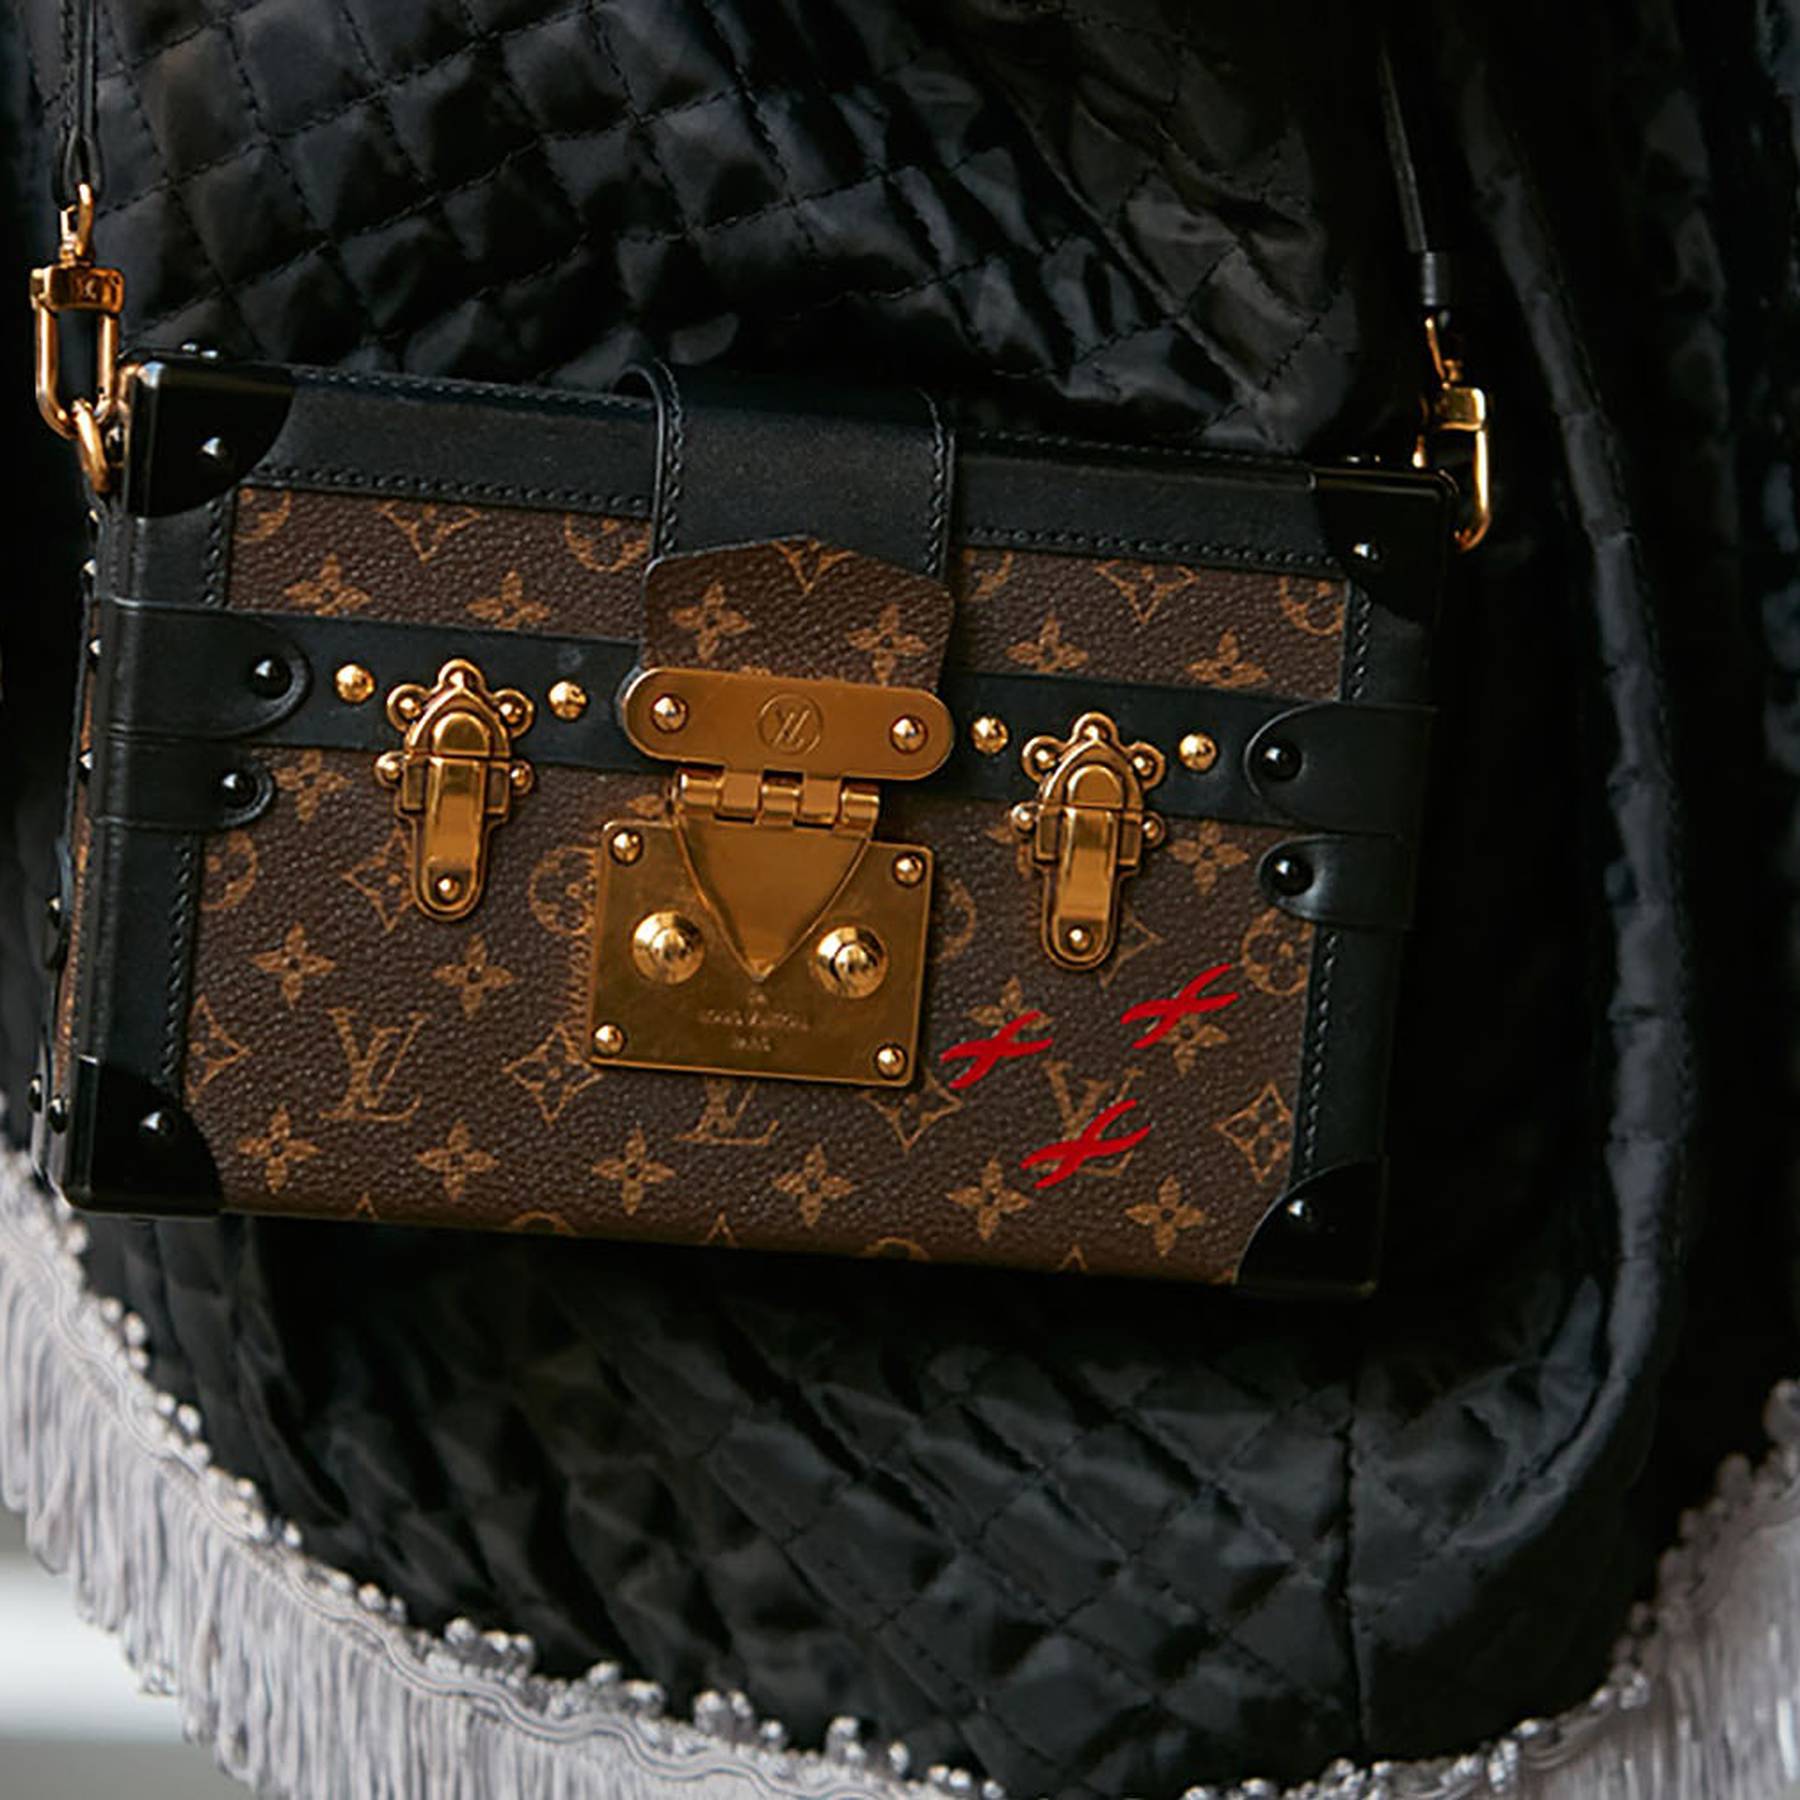 New Louis Vuitton Handbags to Boast 'Made in the USA' Tags